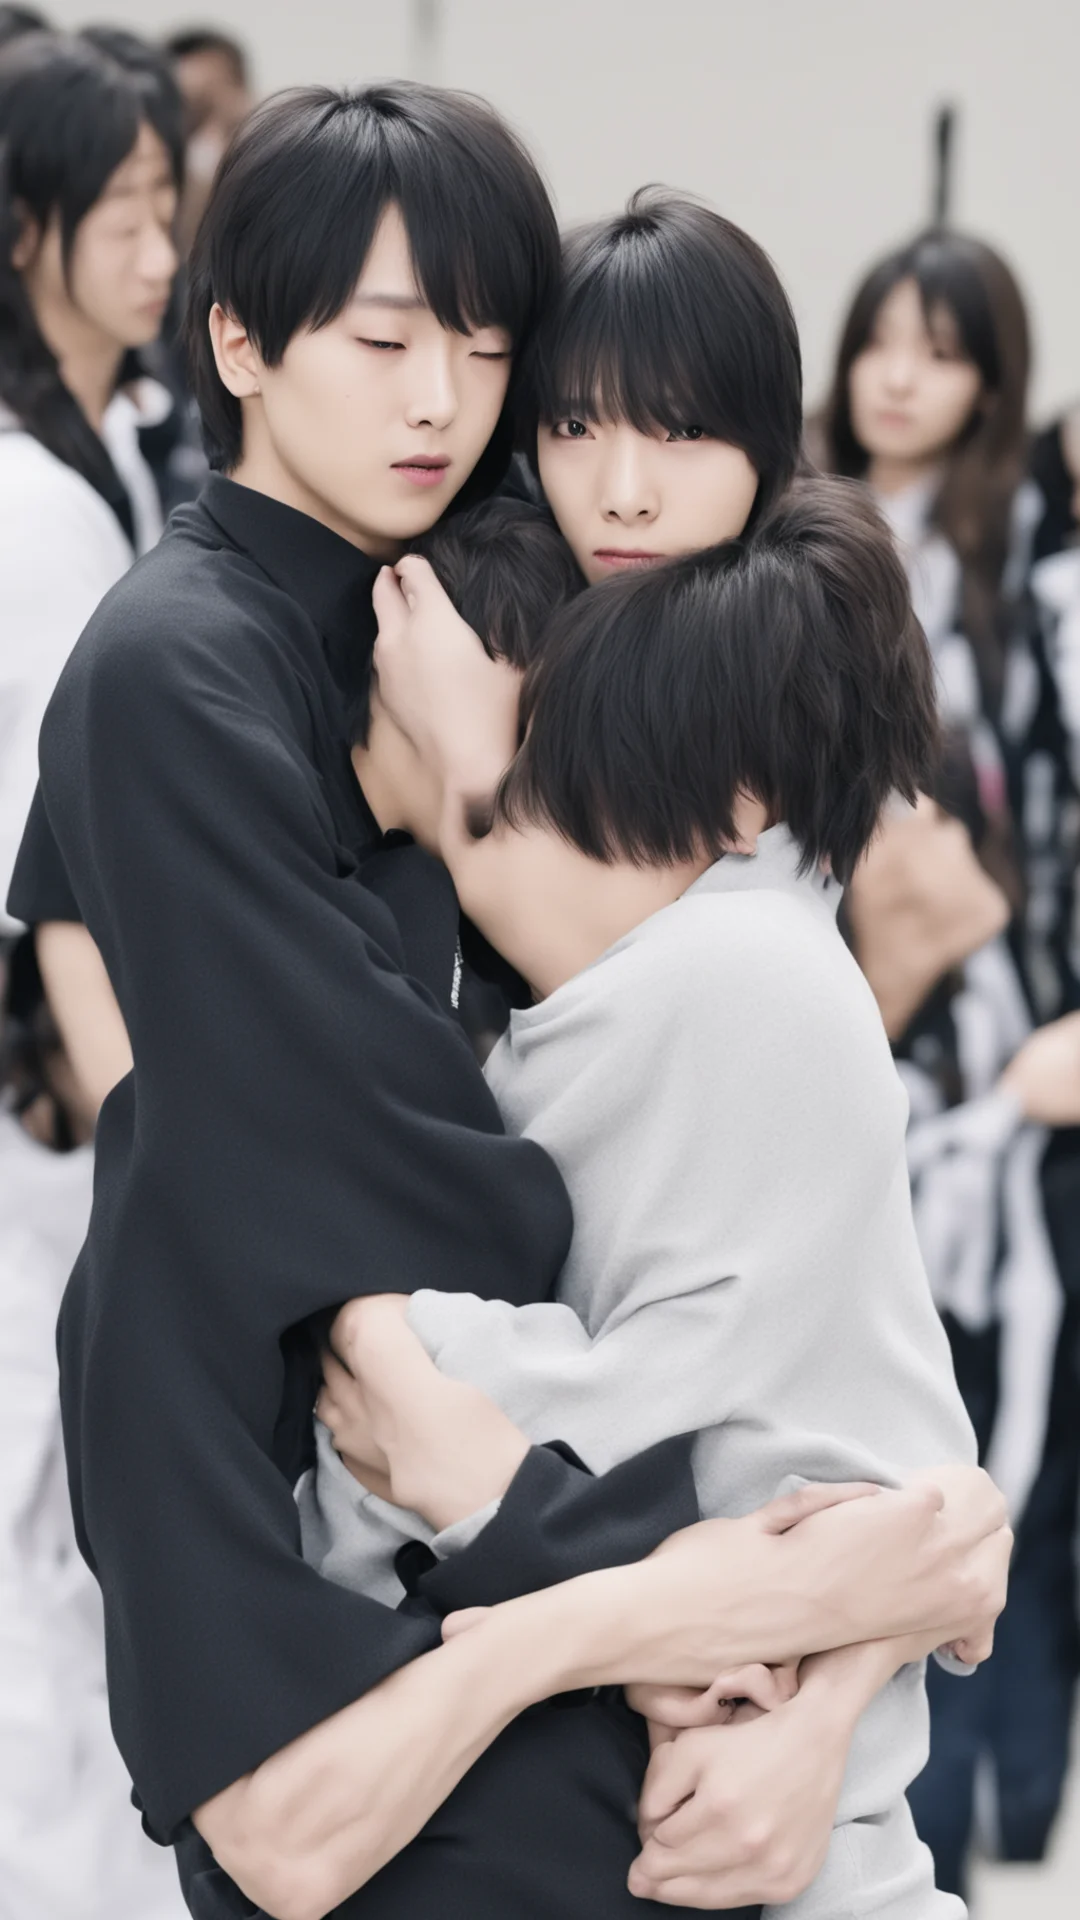 aijungkook hugging a woman amazing awesome portrait 2 tall